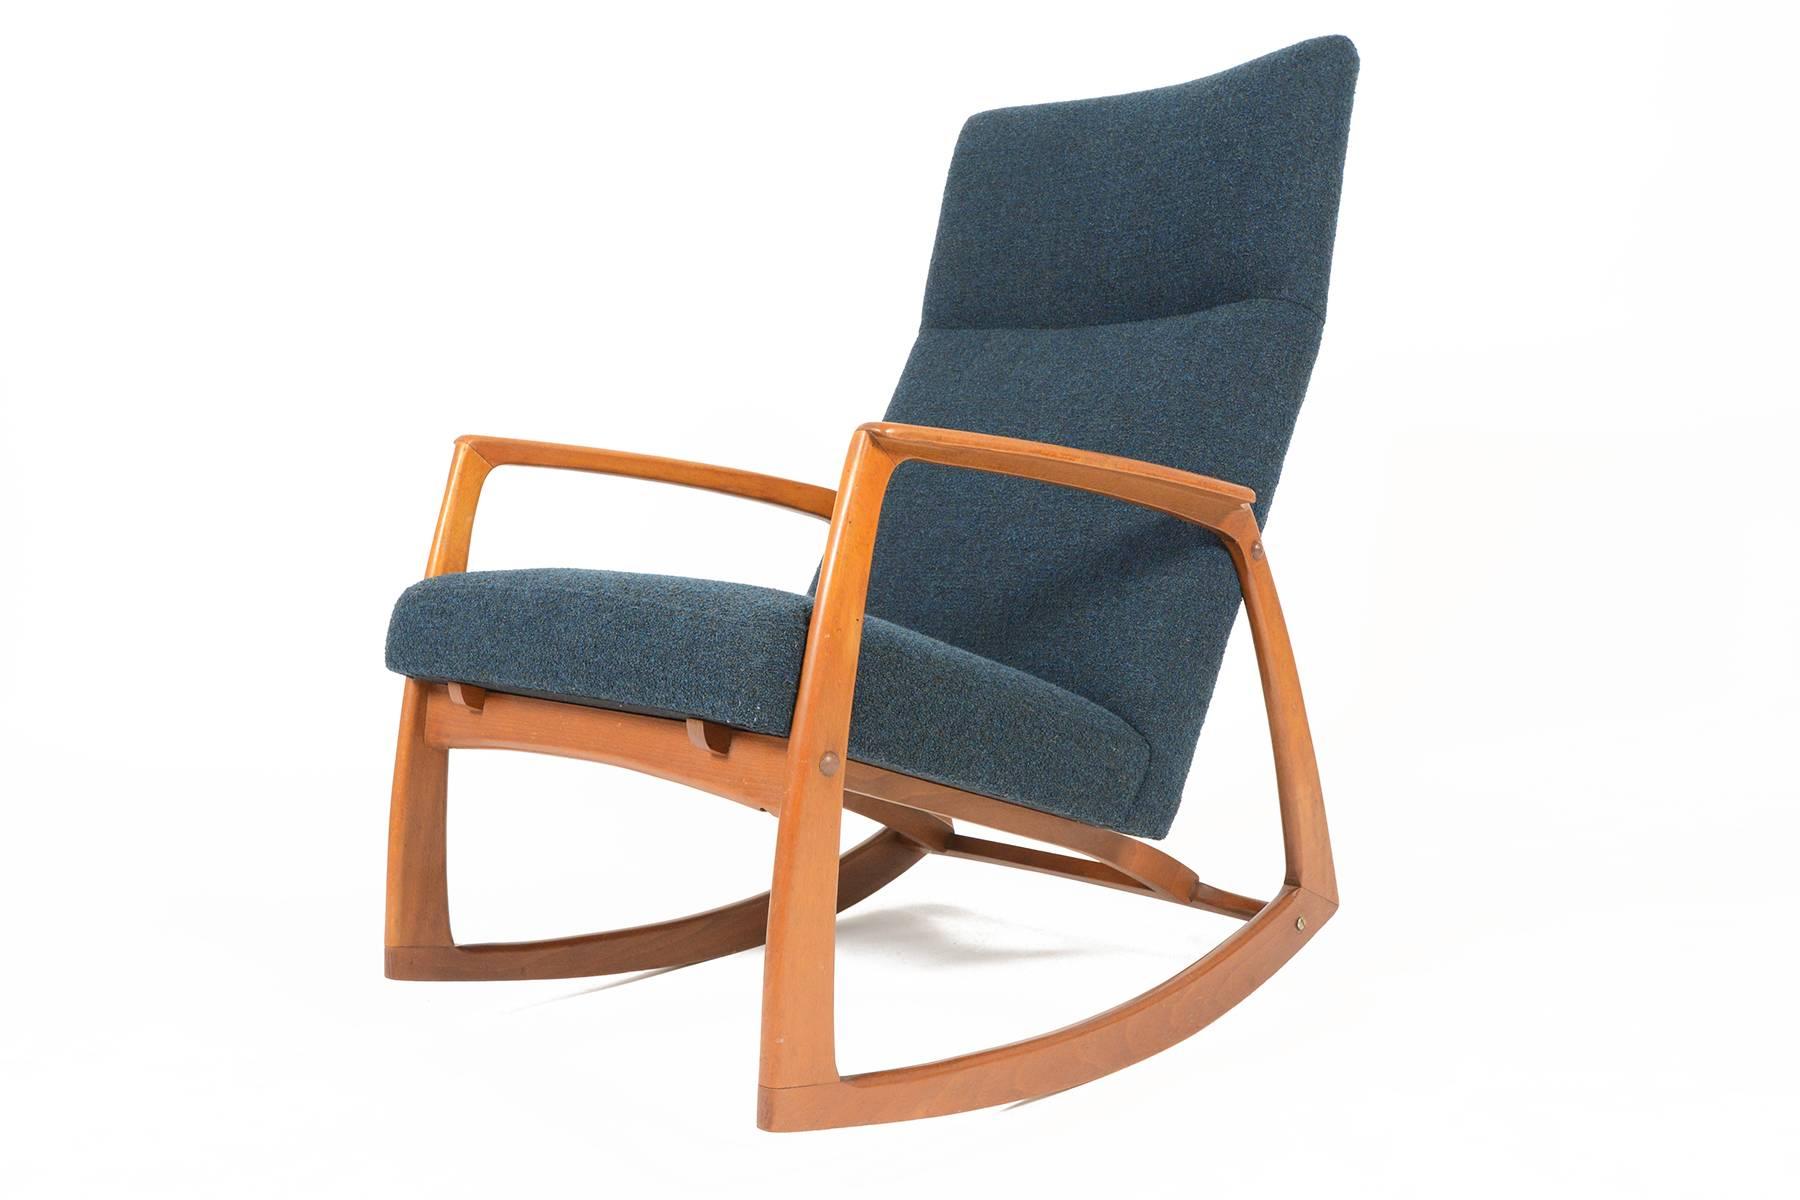 This Danish modern rocking chair is the perfect size for any modern nursery or living room. Crafted from solid teak, the frame features beautifully sculpted joinery. Recently upholstered in nubby aegean blue Danish Kvadrat Outback wool. The frame is